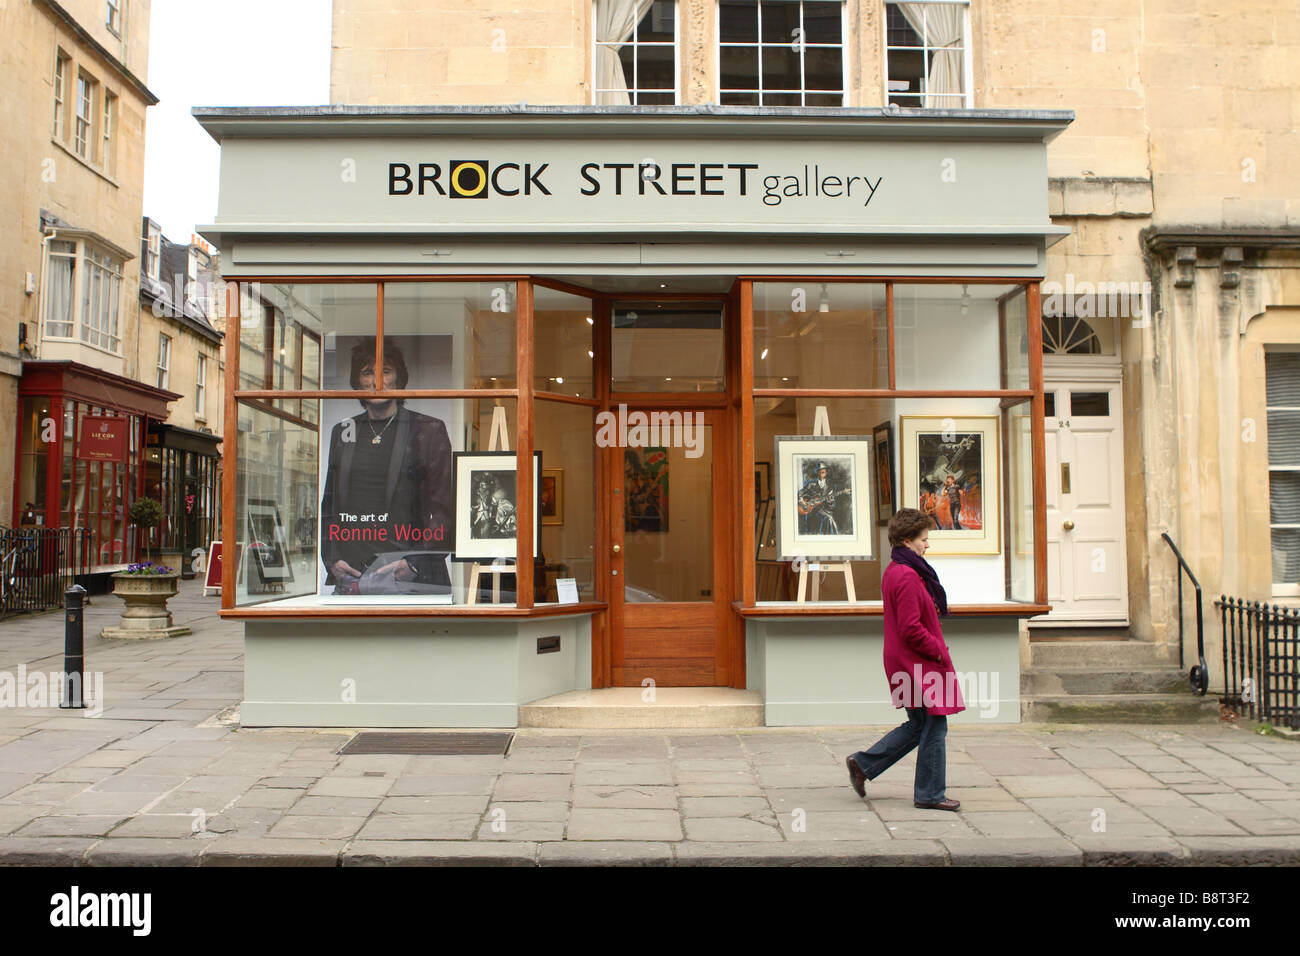 Bath England the Brock Street Gallery sells paintings and art works this exhibition shows work by artist Keith Richards Stock Photo